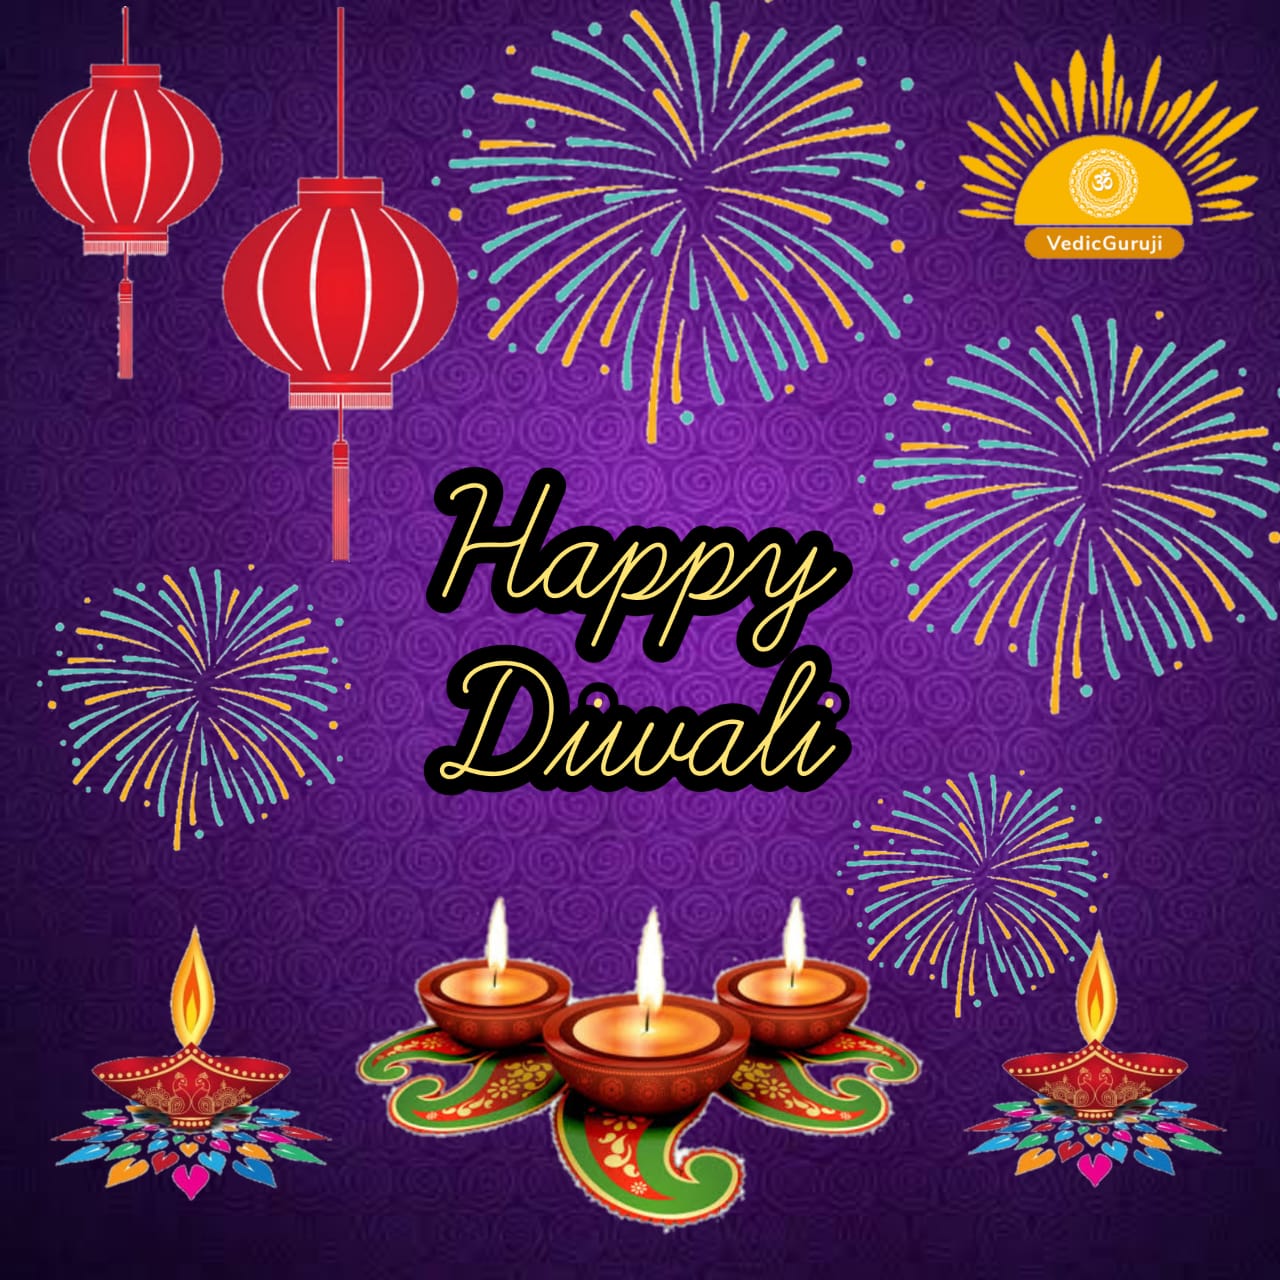 Diwali- the most-awaited festival of the year